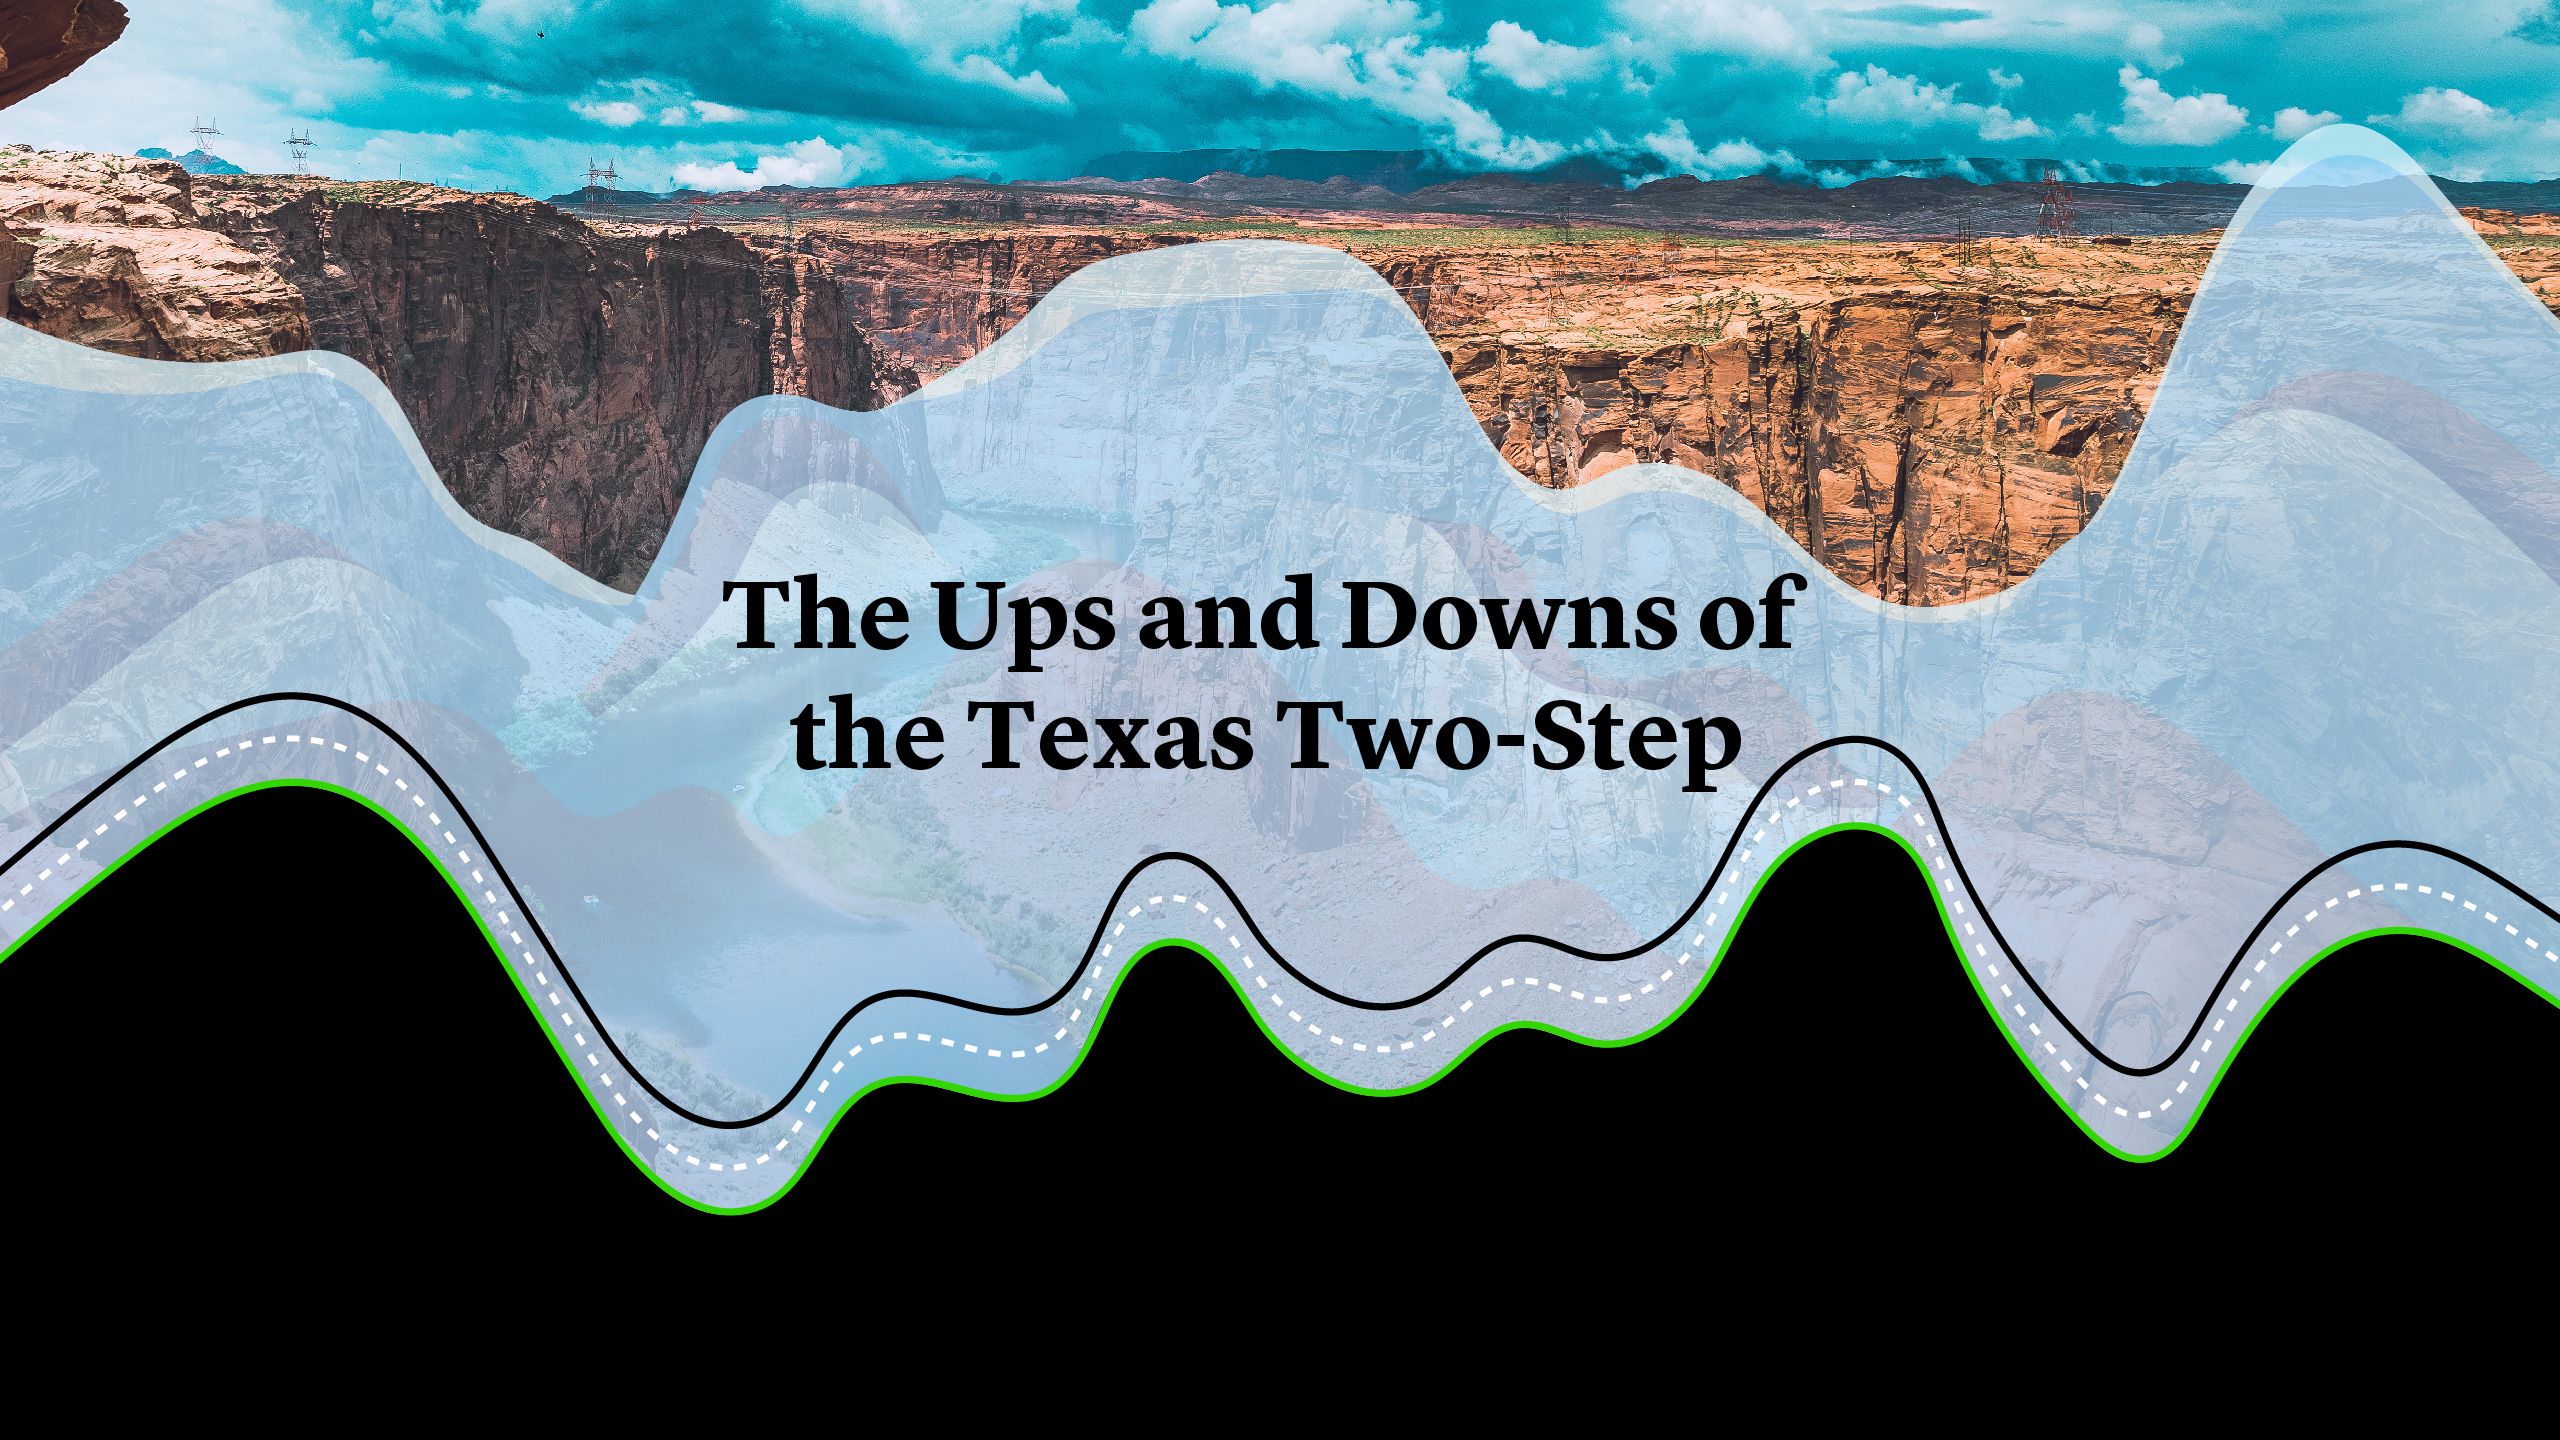 The Ups and Downs of the Texas Two-Step